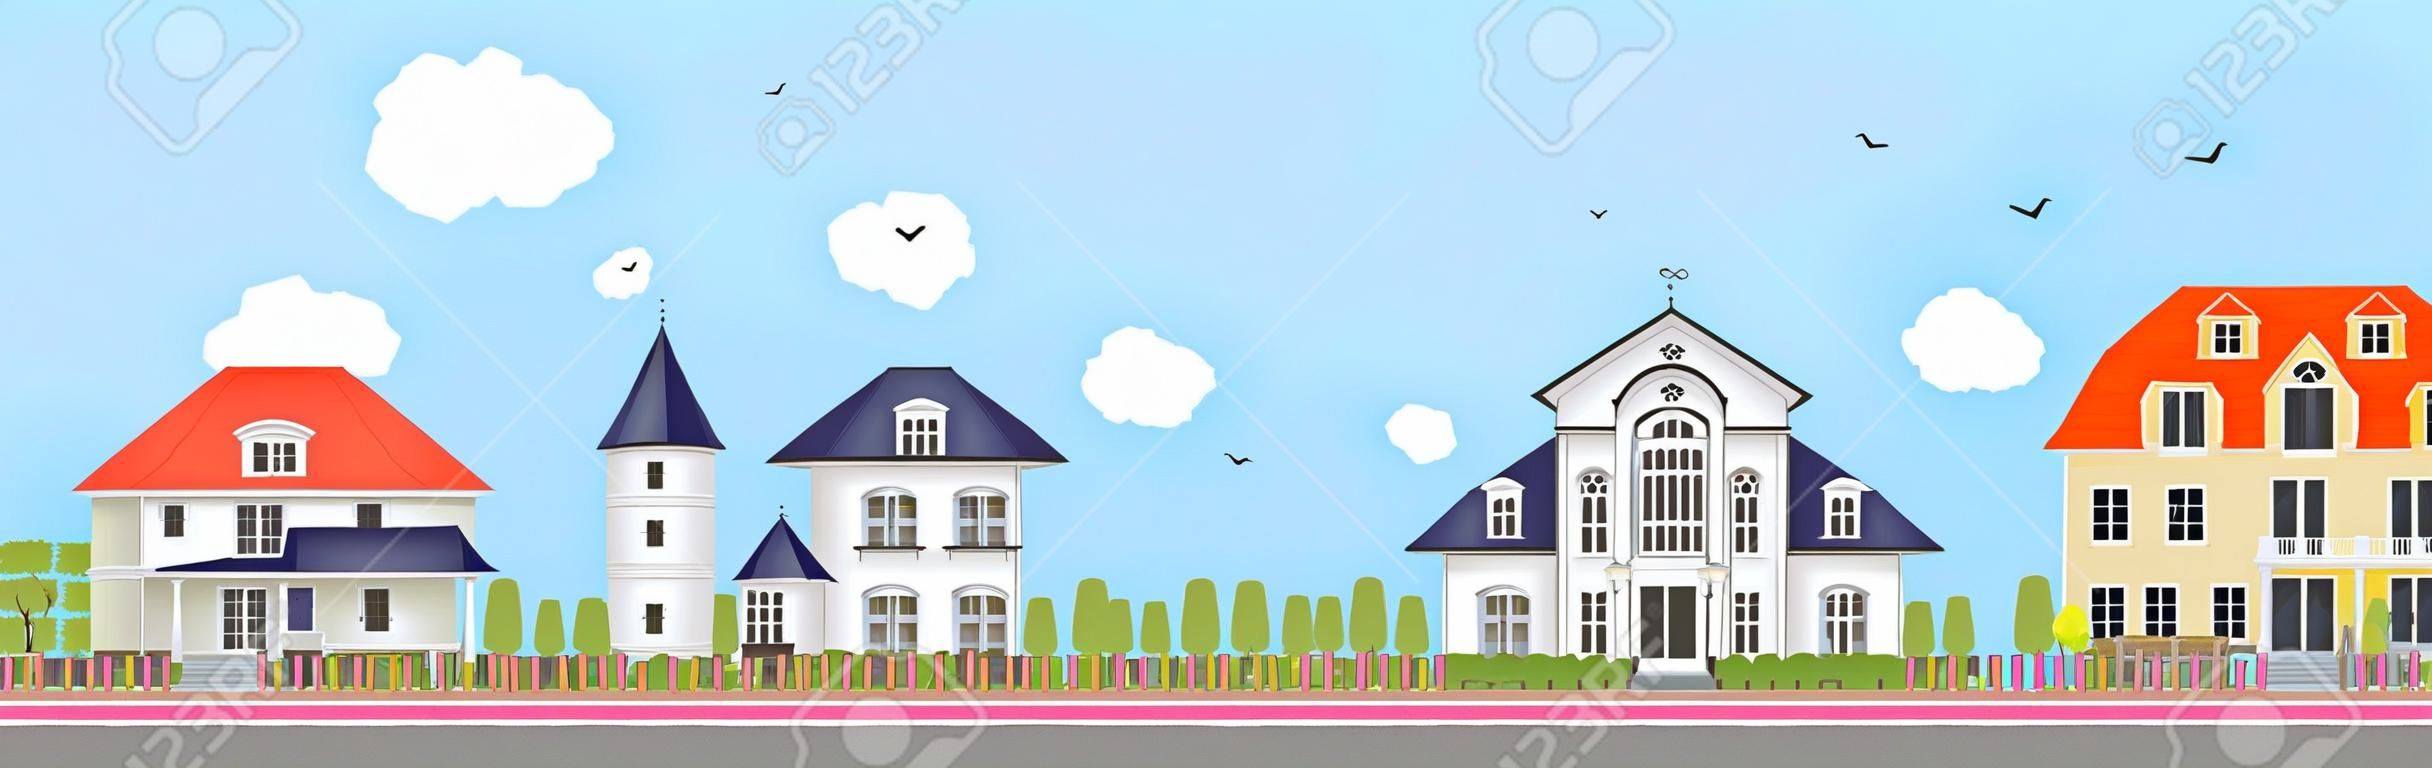 Row of different colorful family houses. House home exterior.